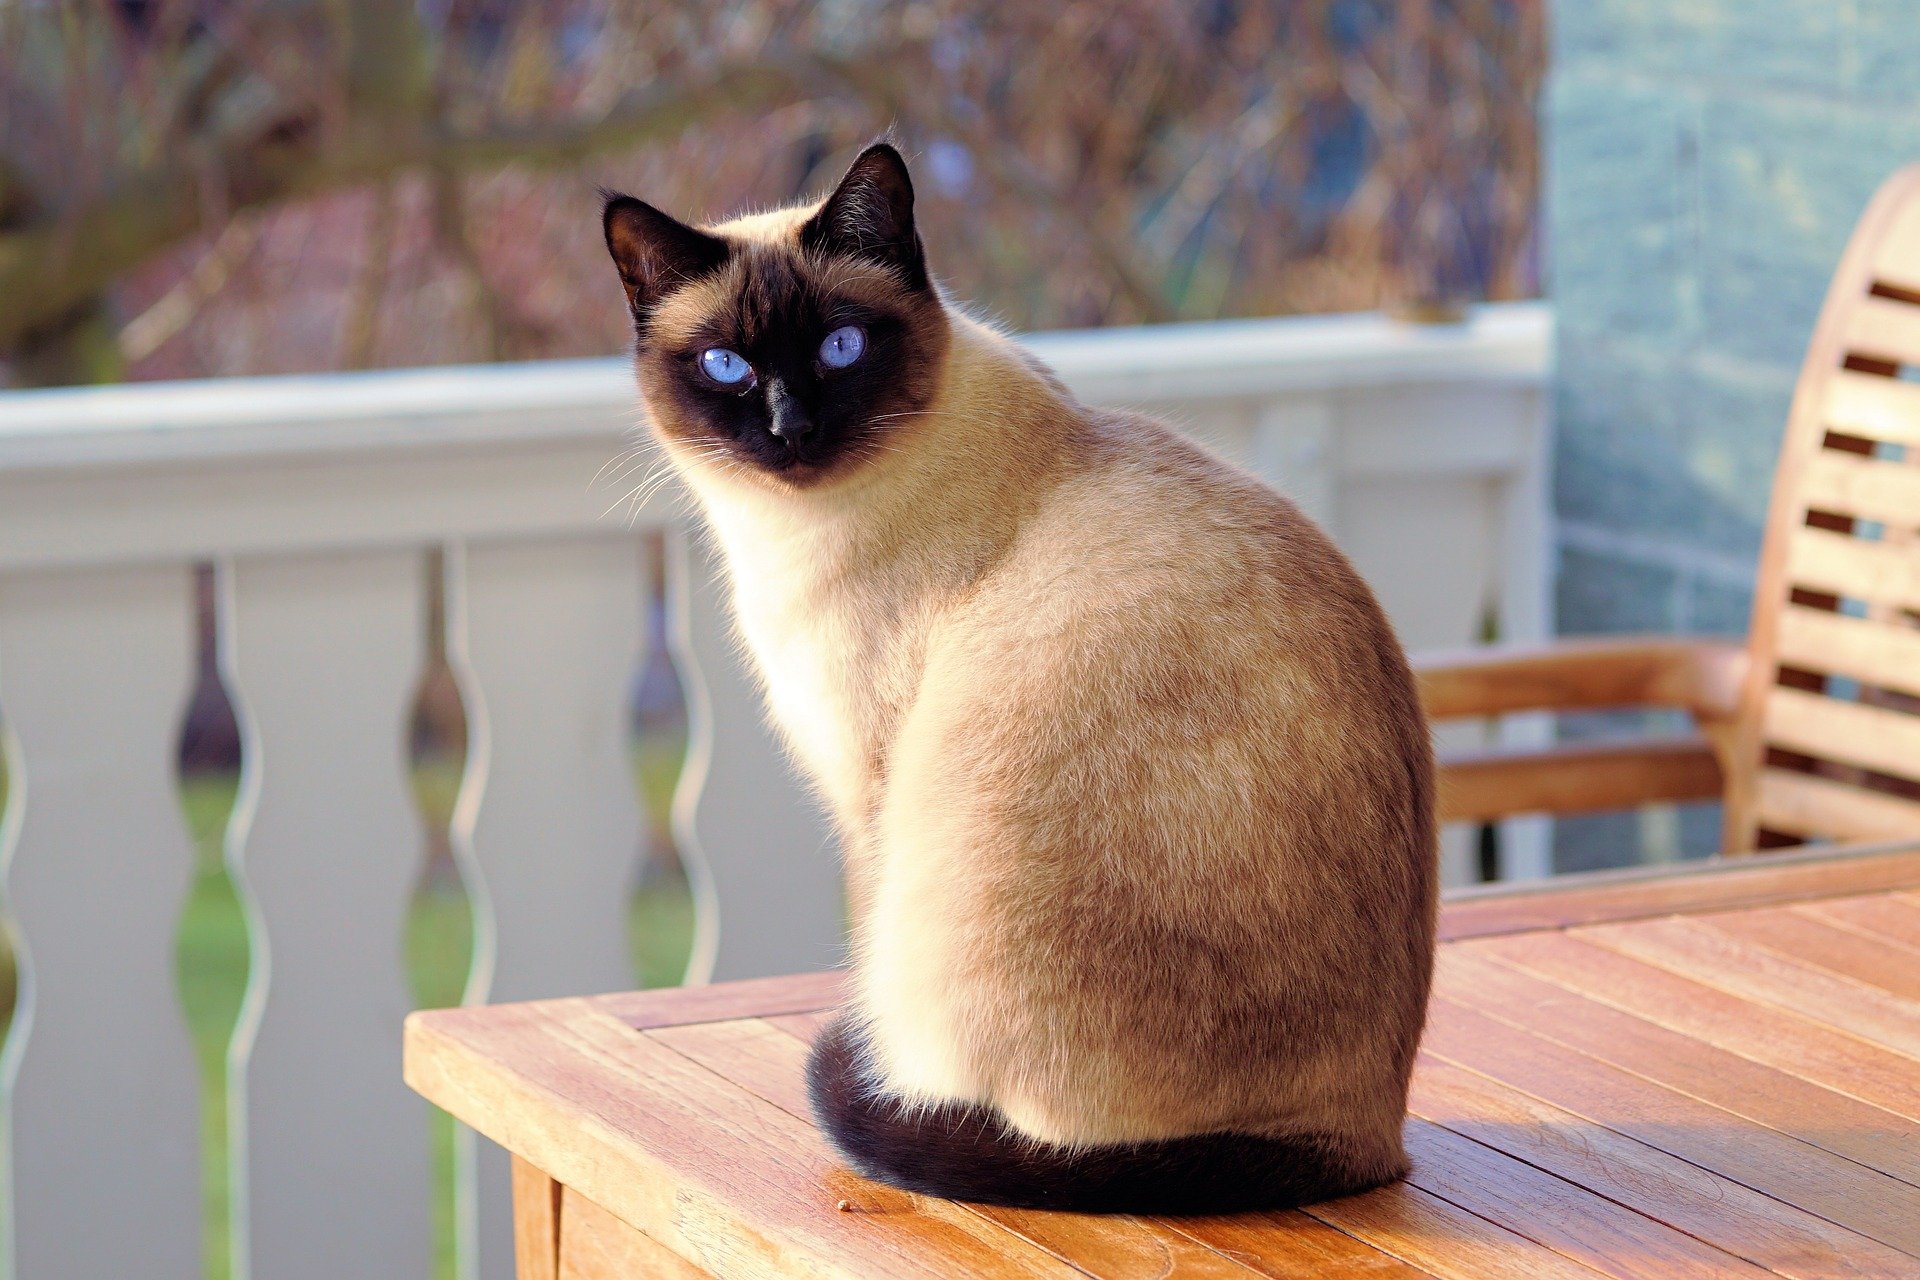  10 cute Siamese cat names youre going to want to steal for your feline friend